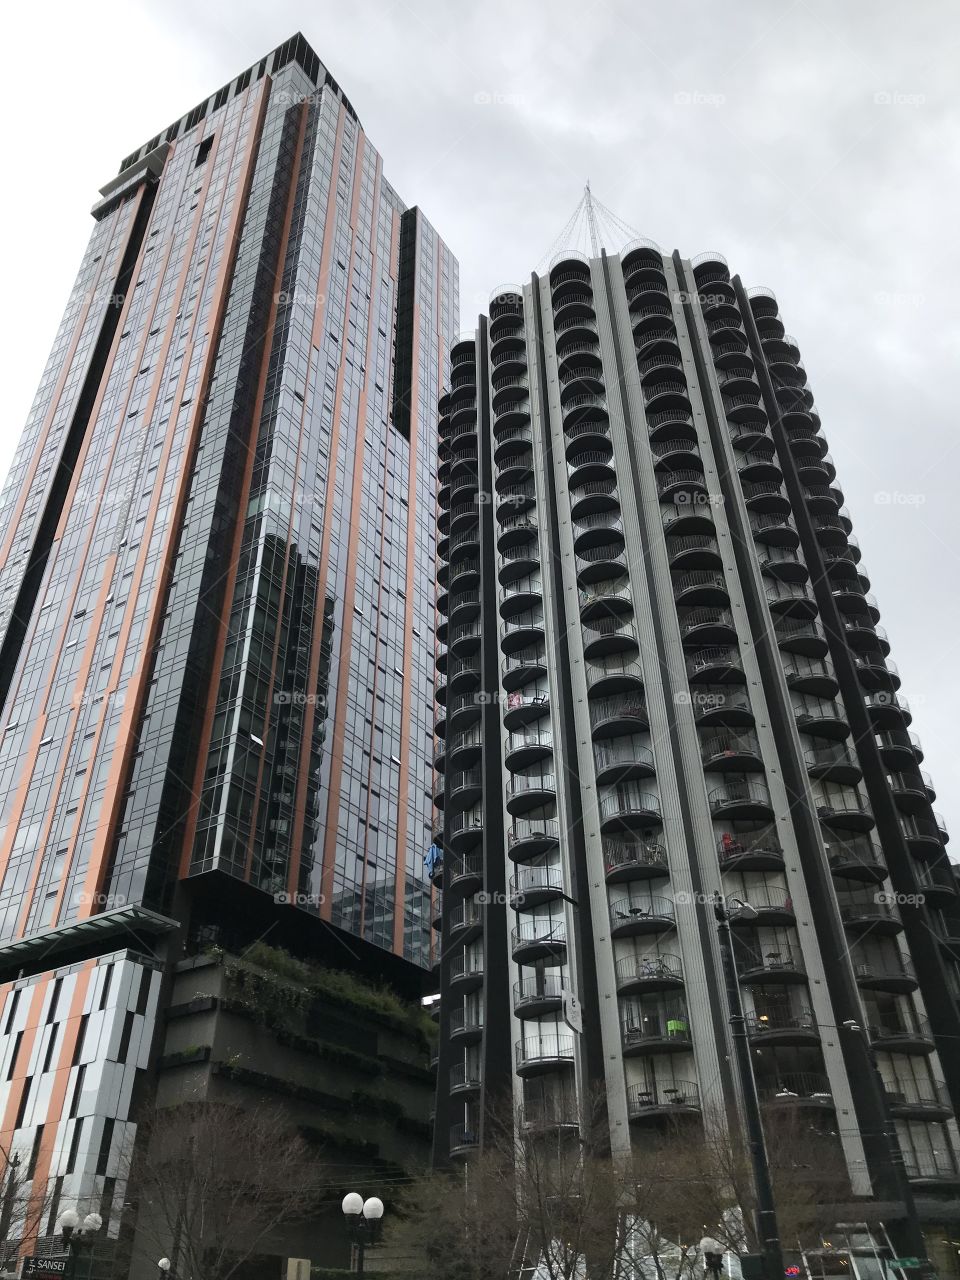 Seattle Architecture is superb!